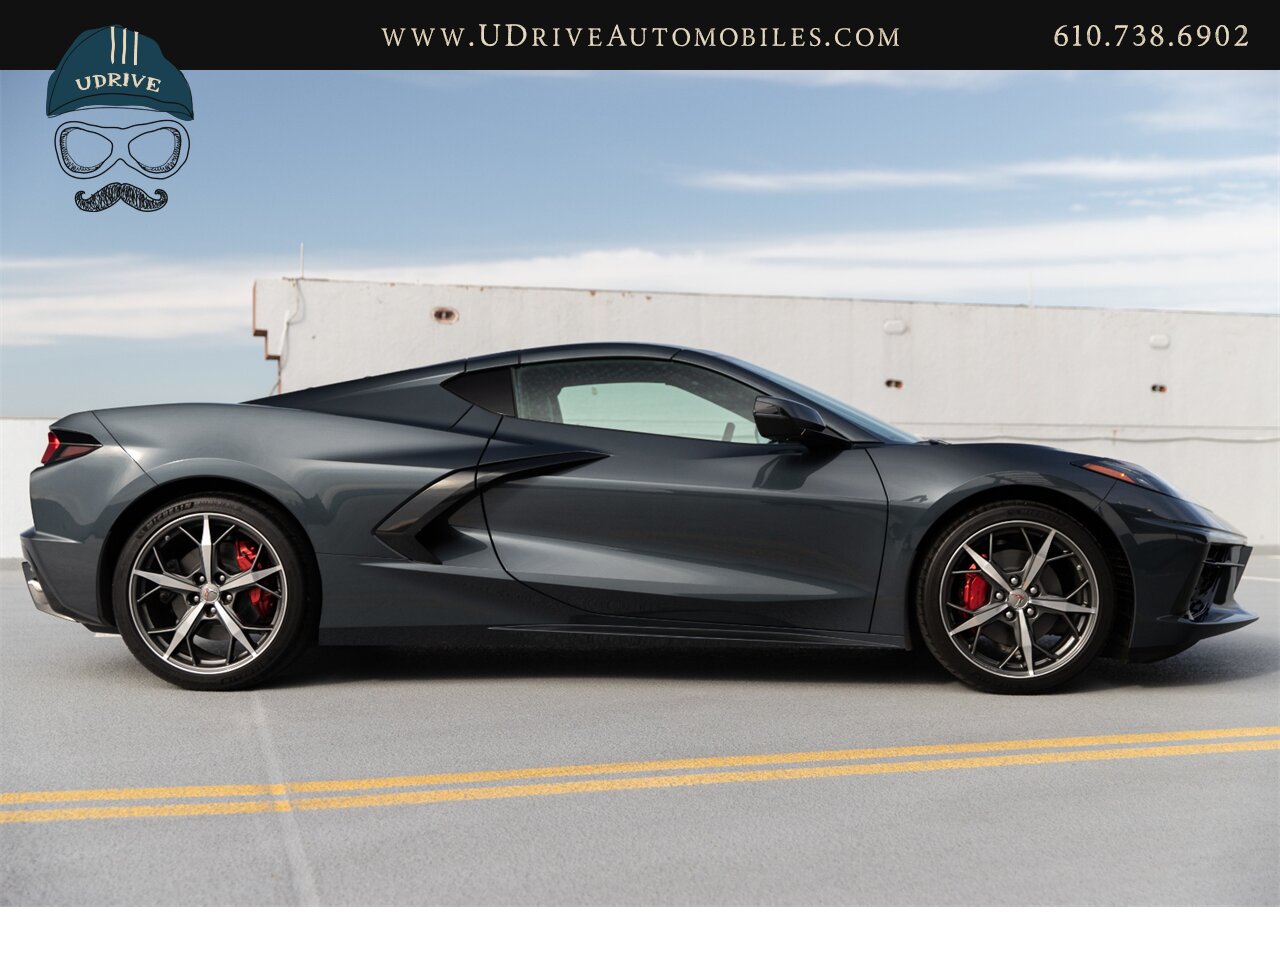 2020 Chevrolet Corvette Stingray 2LT GT2 Bucket Seats Front Lift  Red Calipers Two Tone Seats Red Lthr - Photo 23 - West Chester, PA 19382